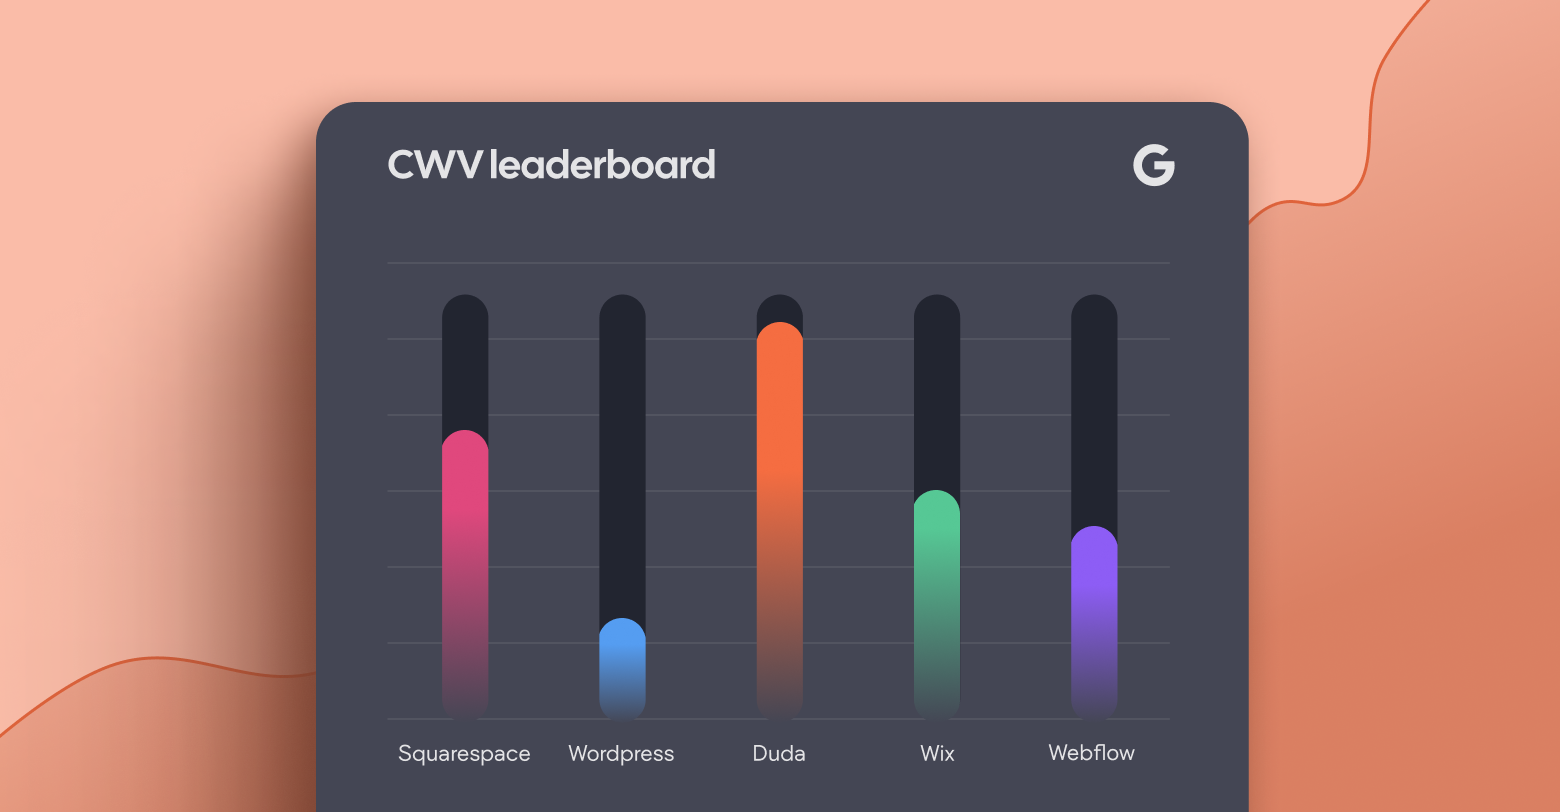 a screenshot of a cwv leaderboard with a dark background